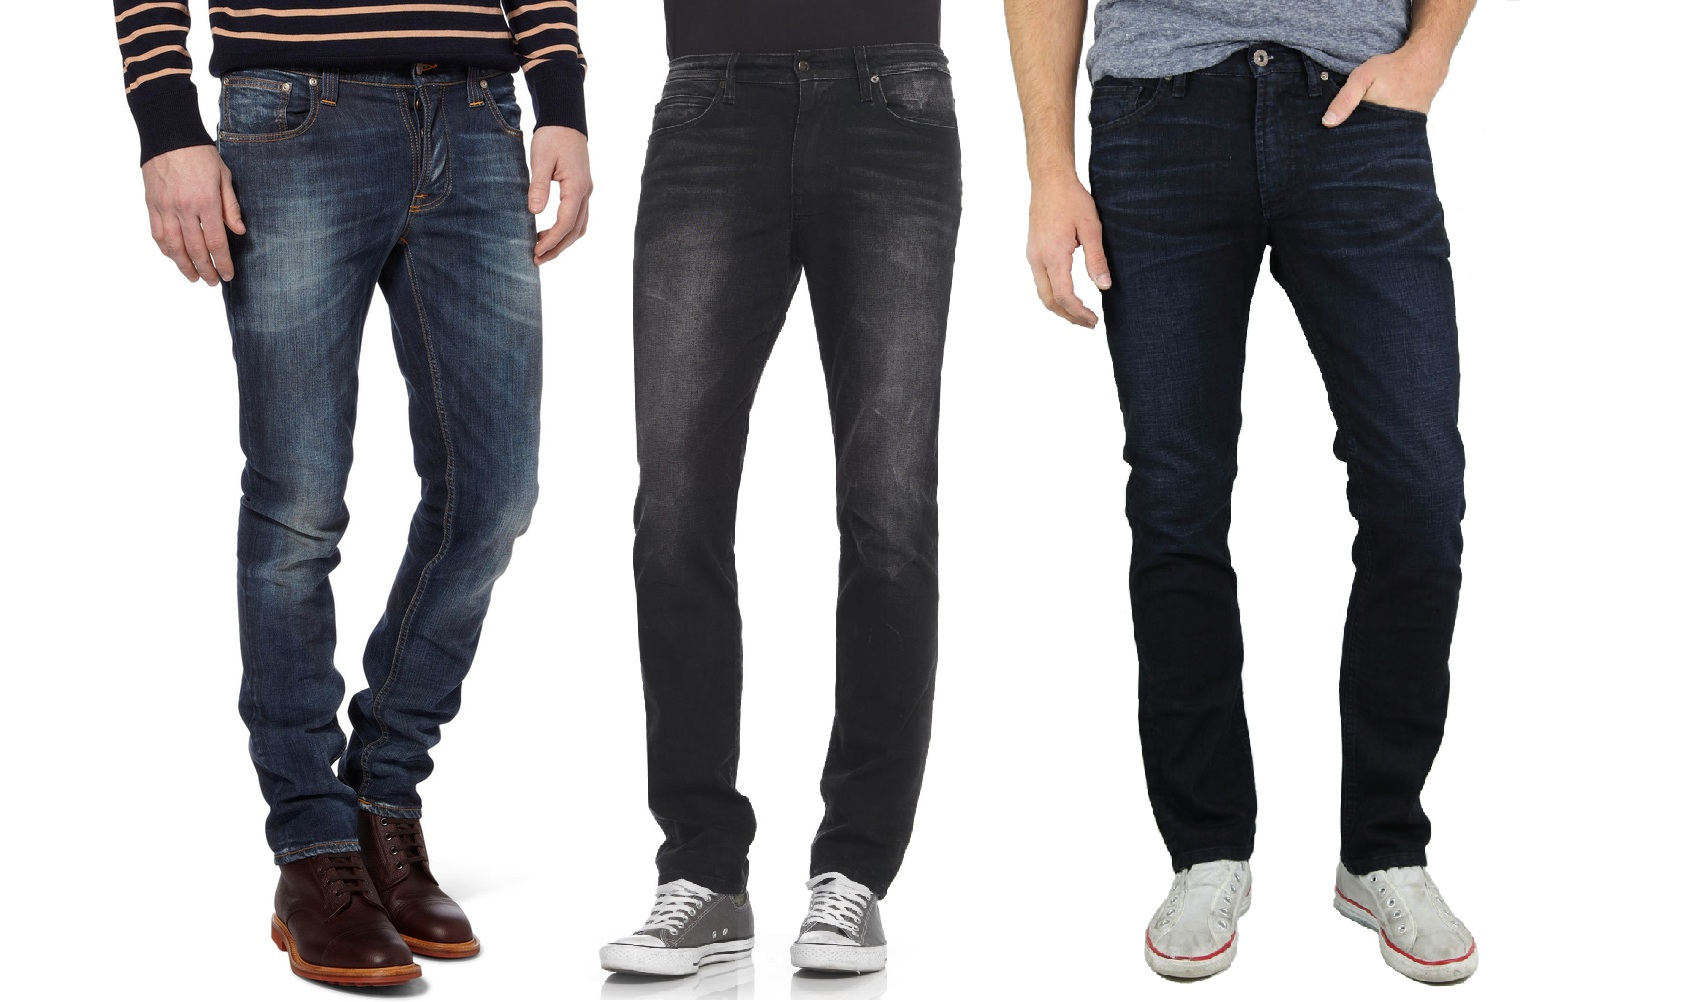 Jeans India s Best Online shopping Store For Men s Fashion